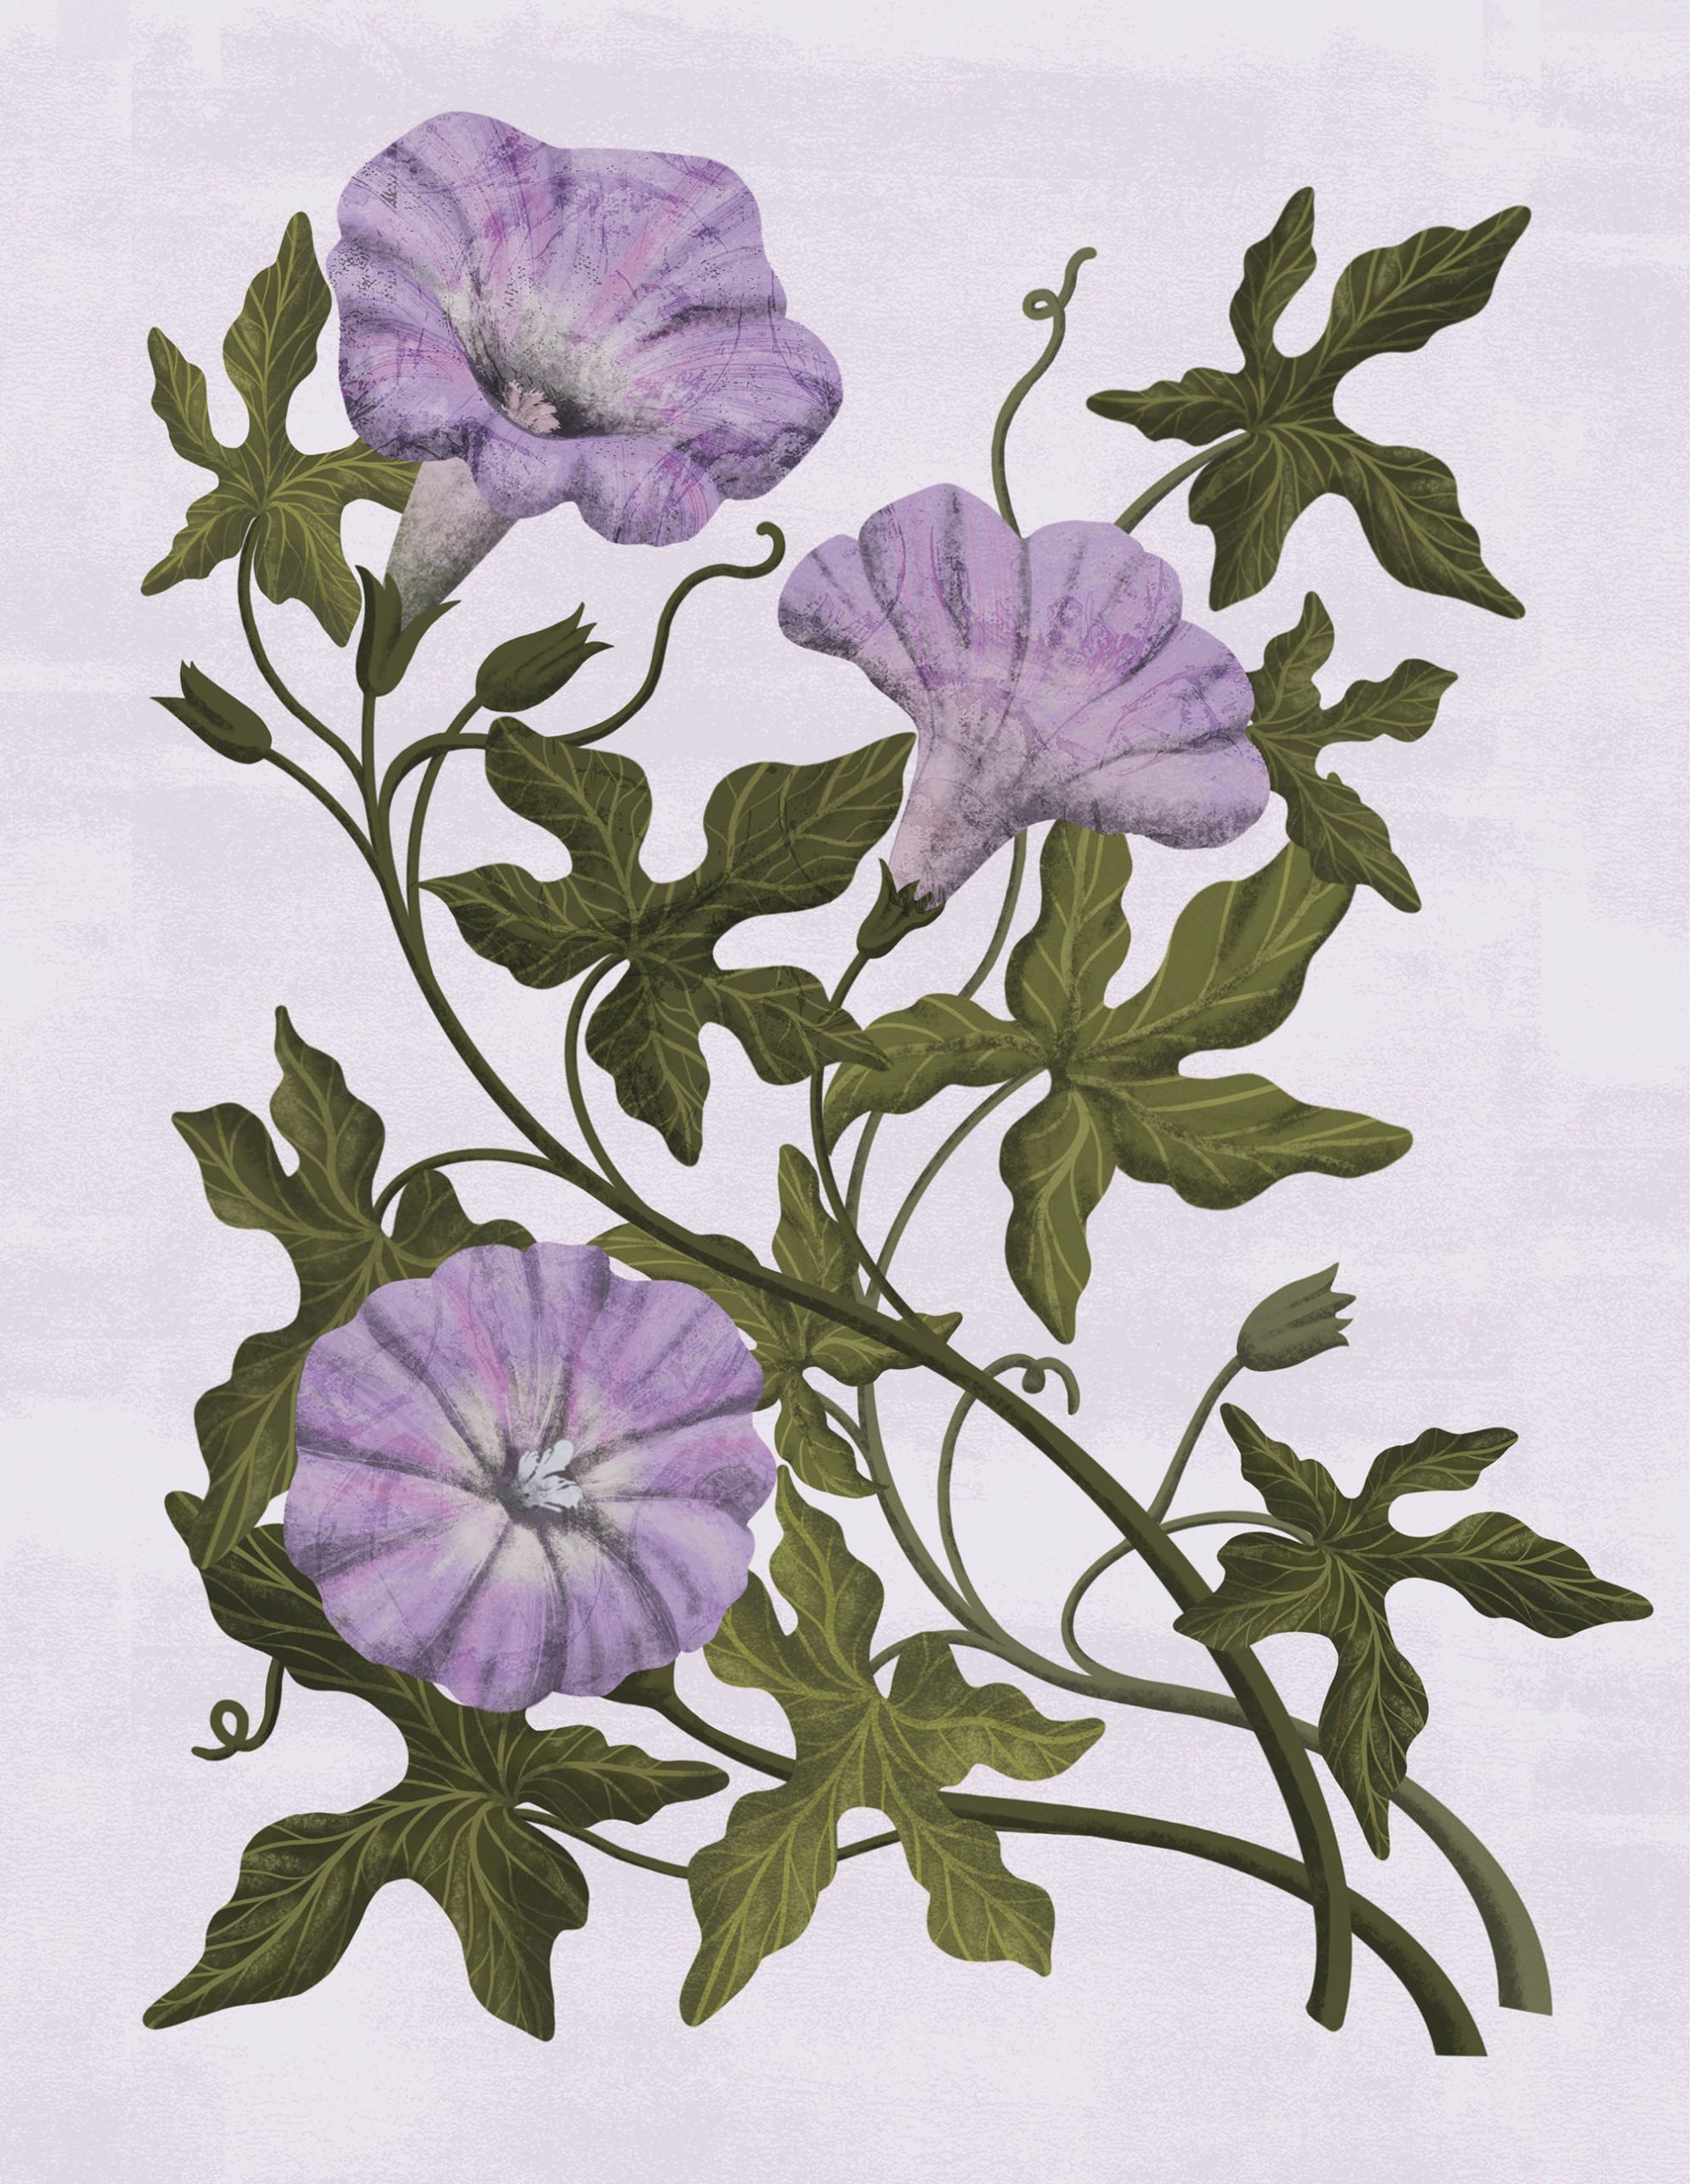 An illustration of purple flowers and green stems